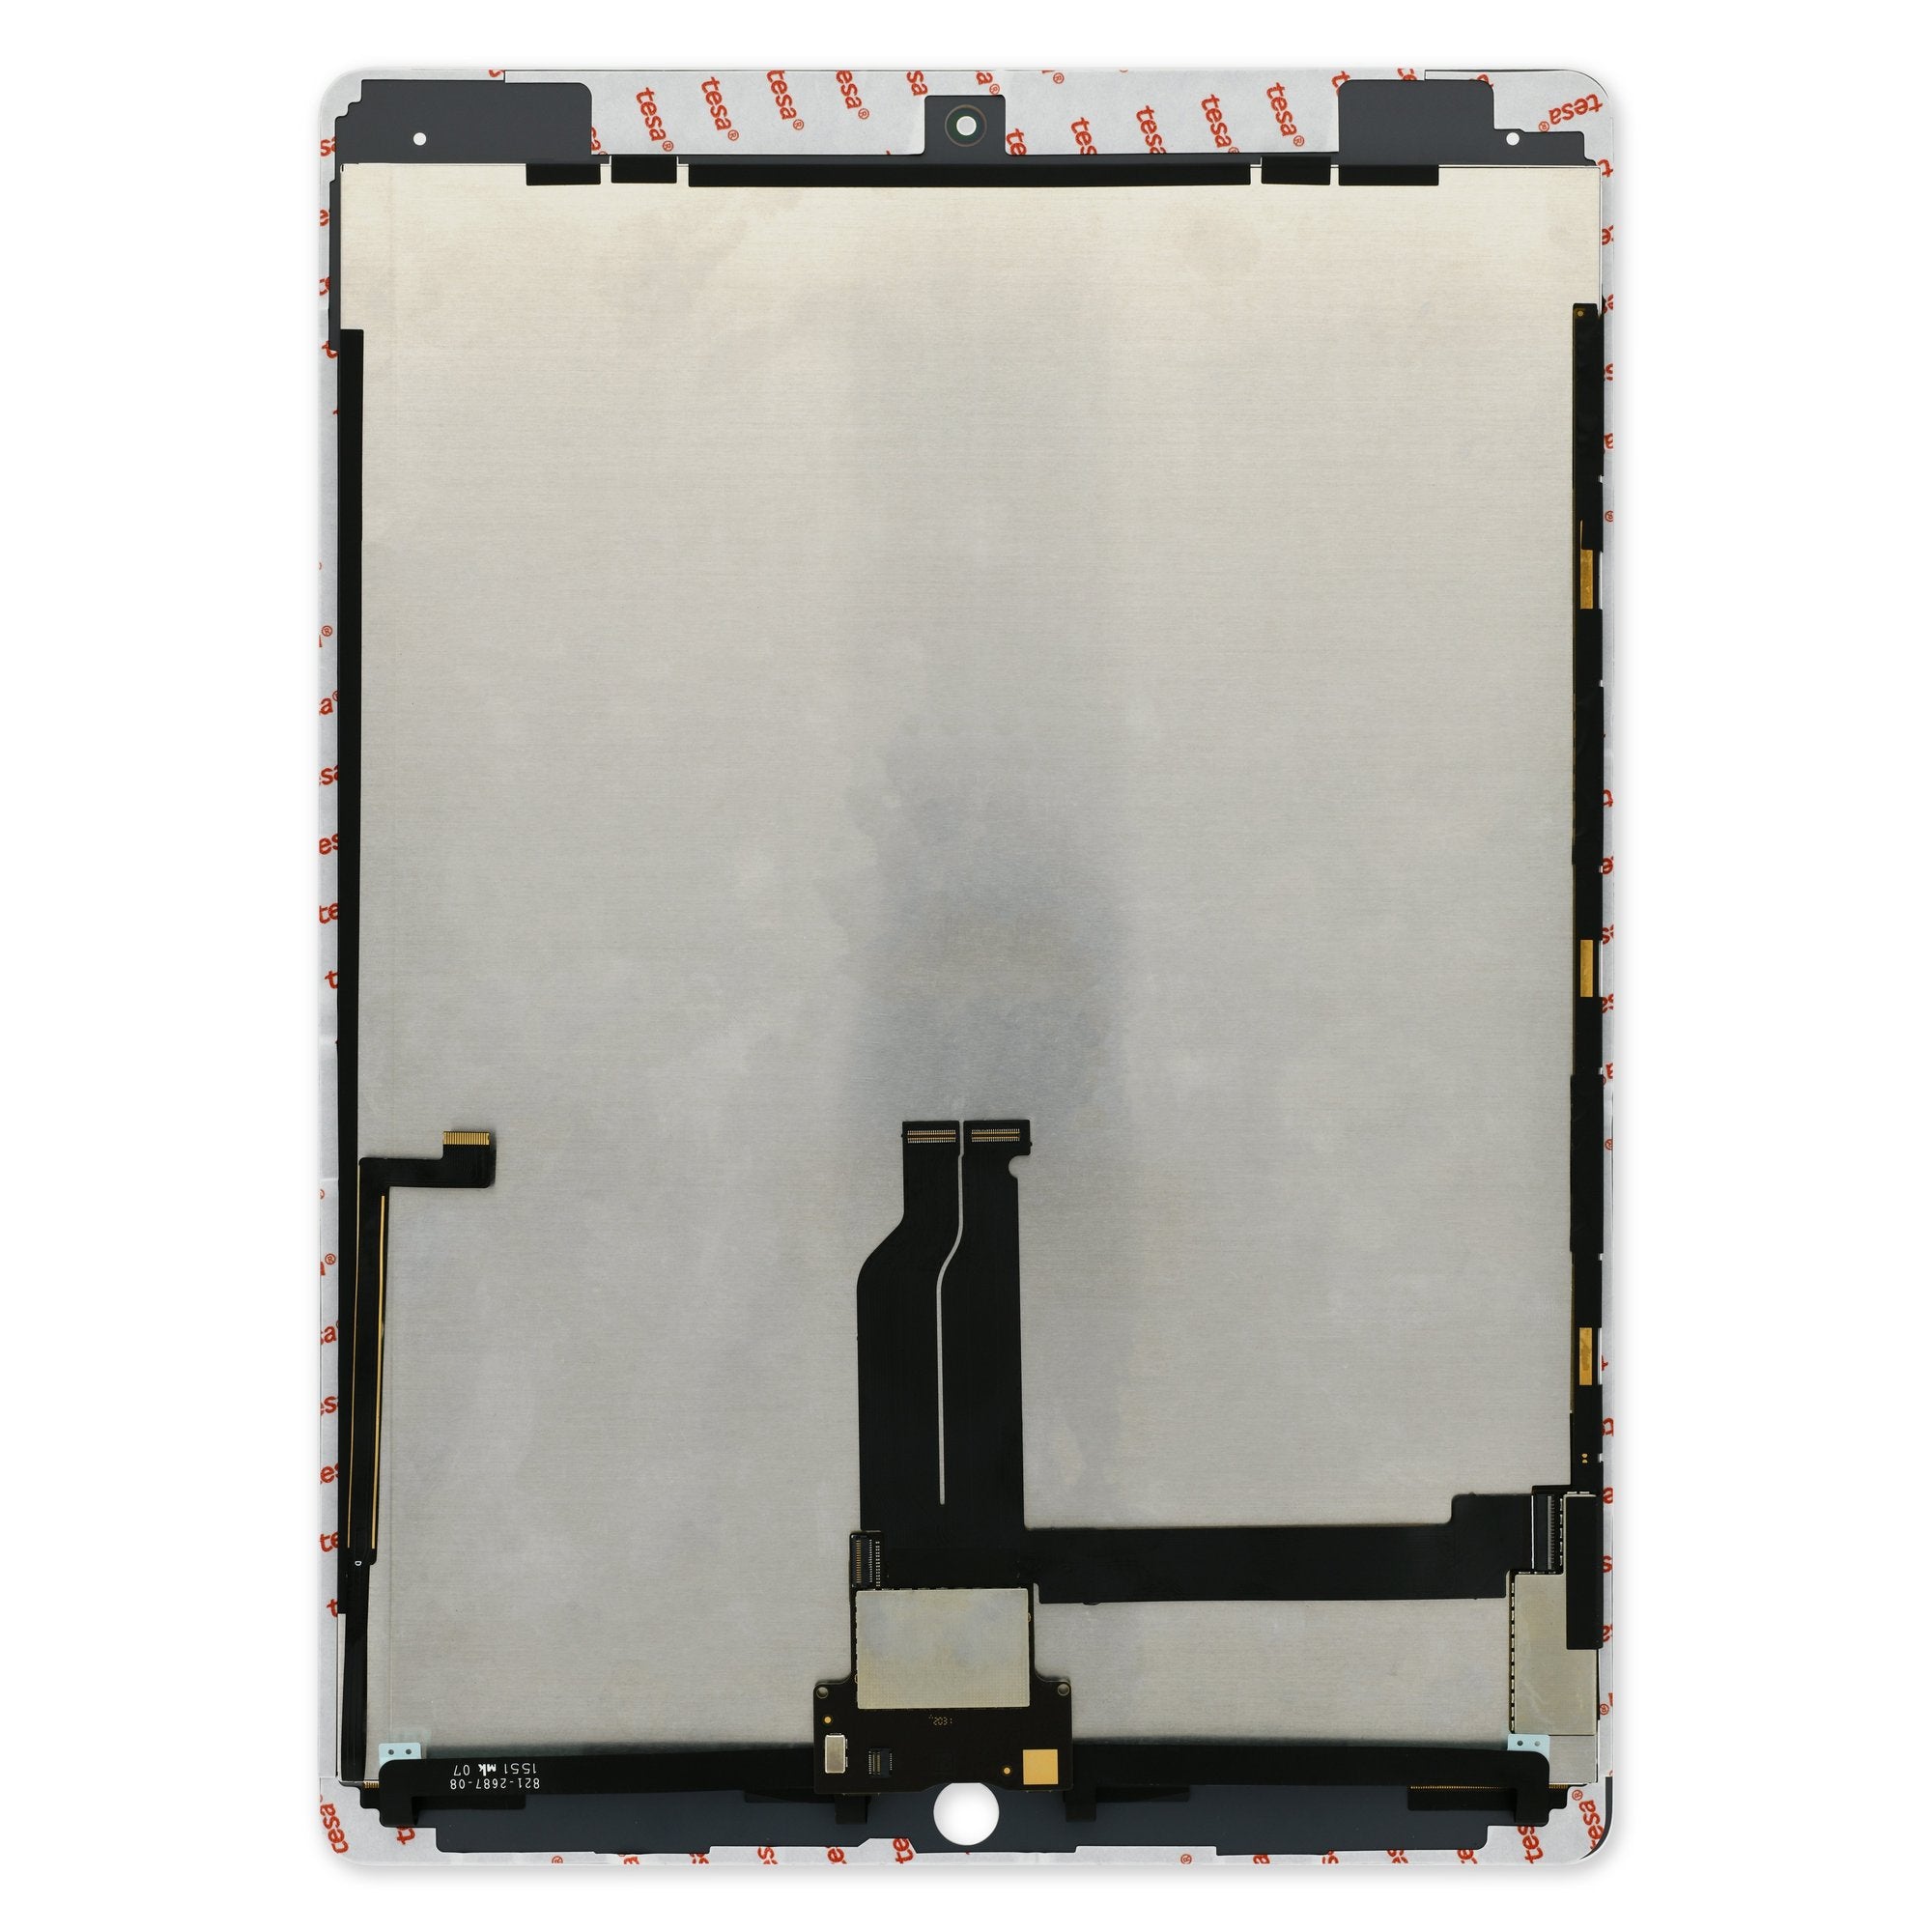 iPad Pro 12.9" (2015) Screen White New Part Only